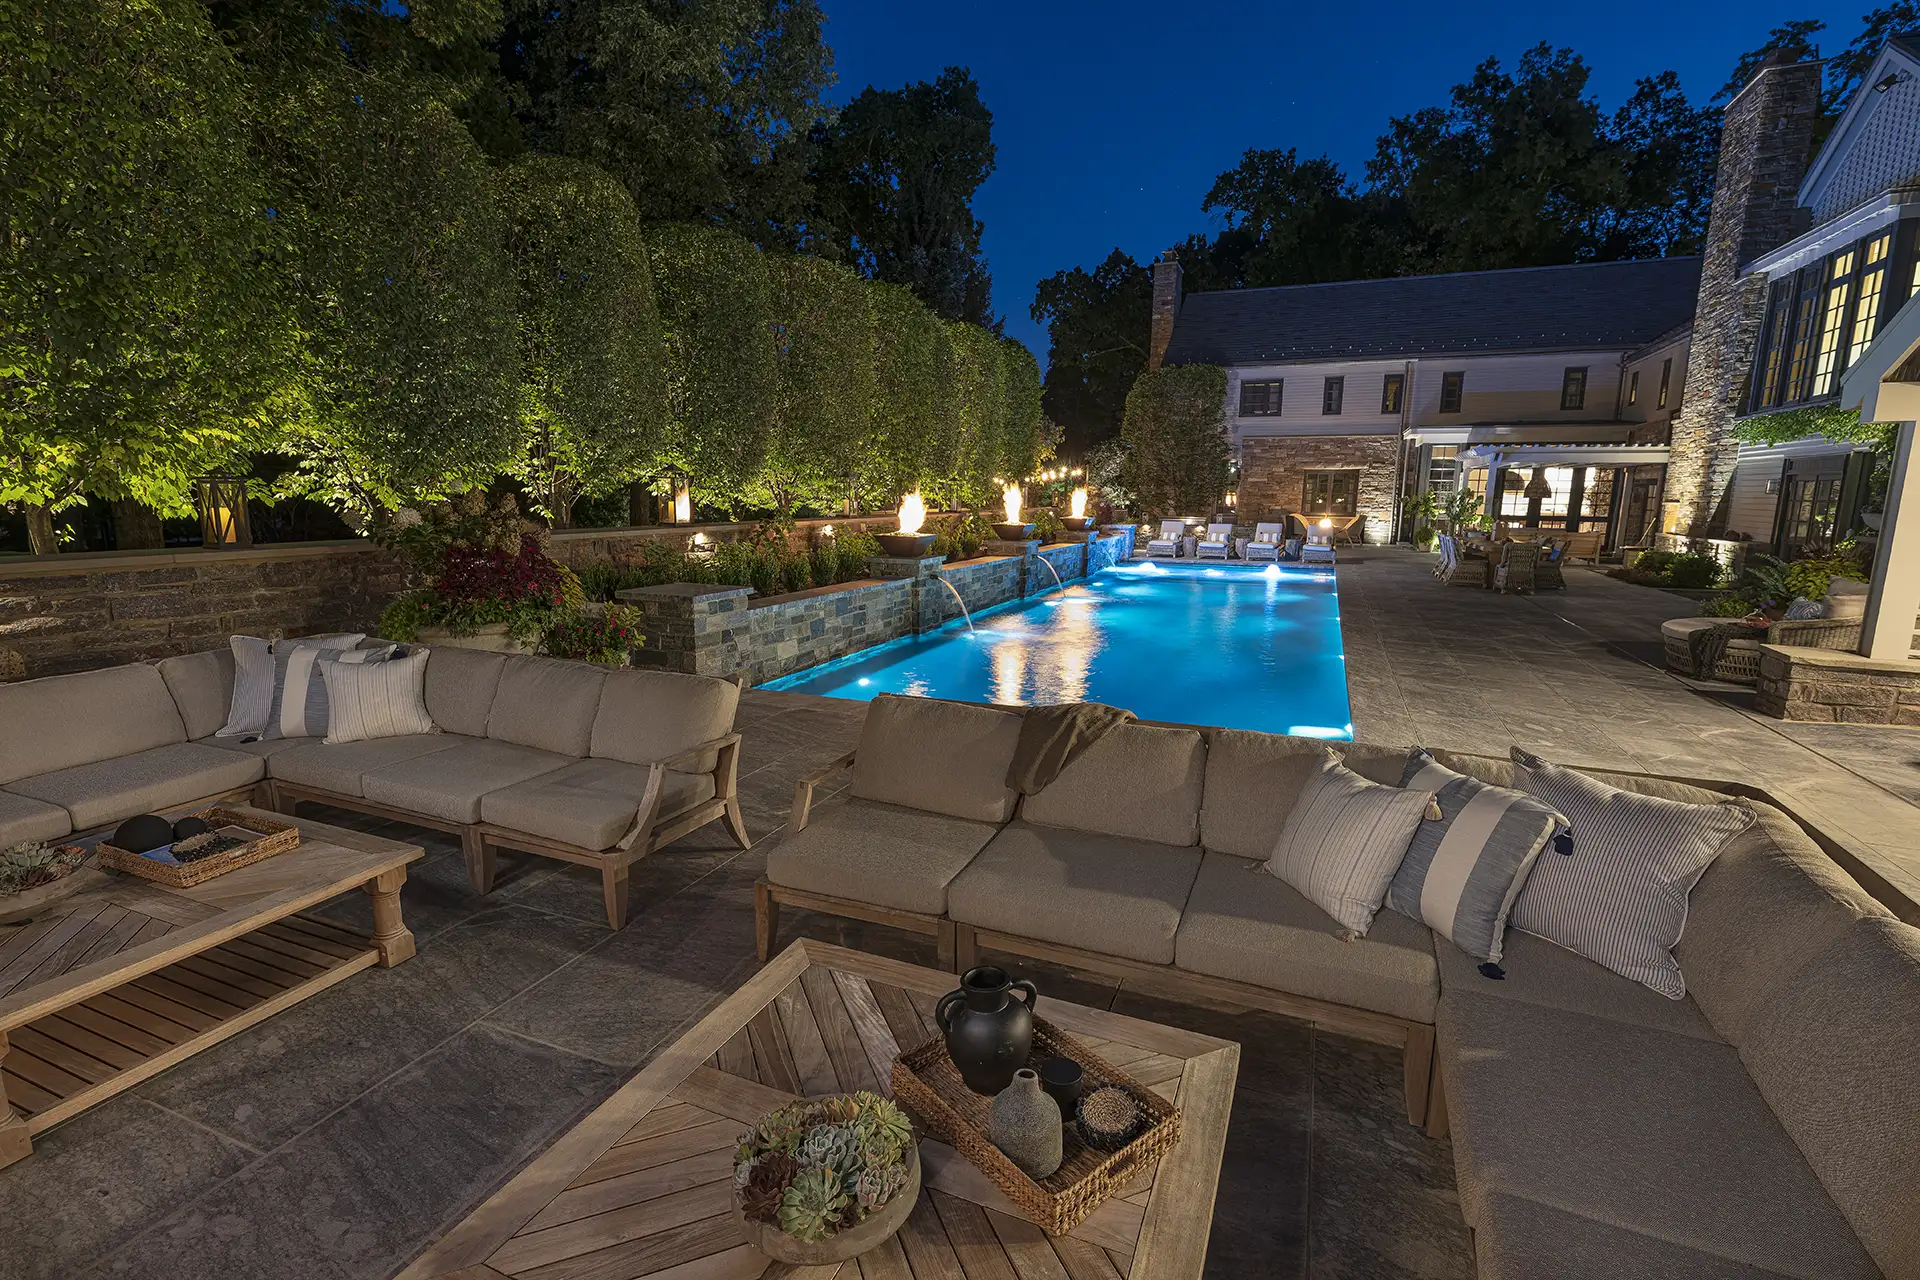 Spaas residence image 1 pool Lighthouse Outdoor Lighting and Audio Northern New Jersey